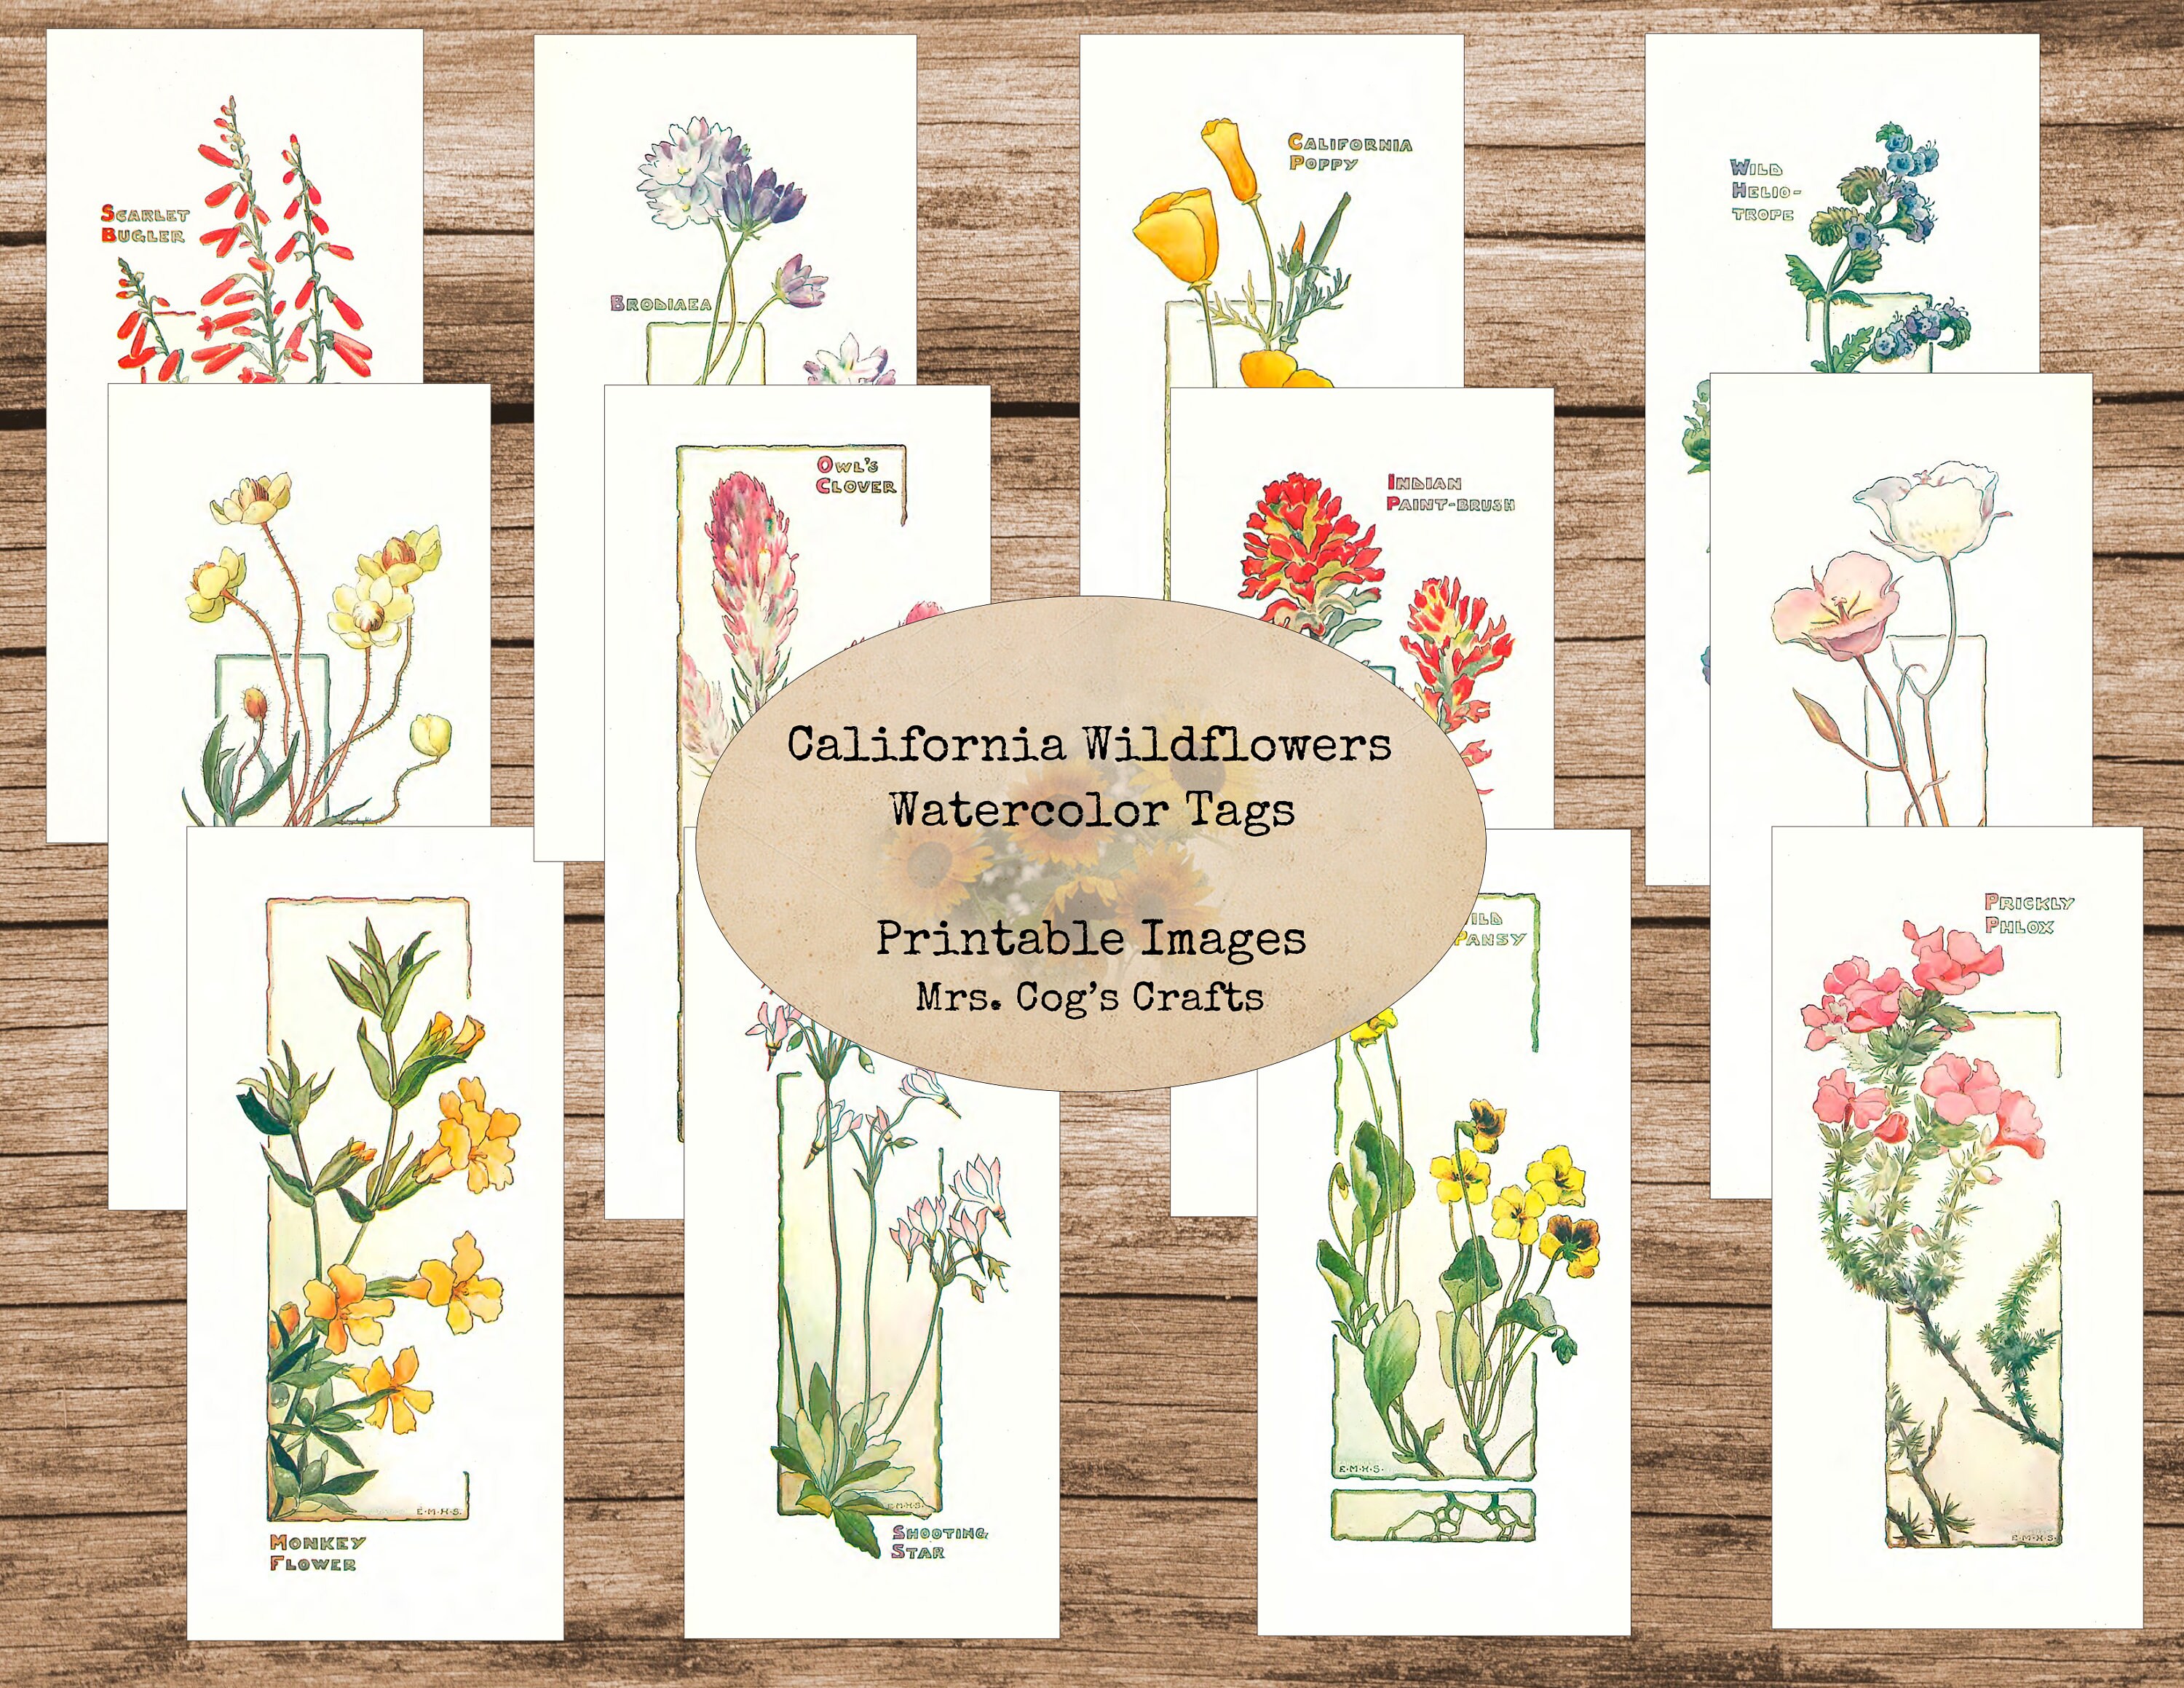 California Wildflowers Watercolor Tags Bookmarks | Etsy